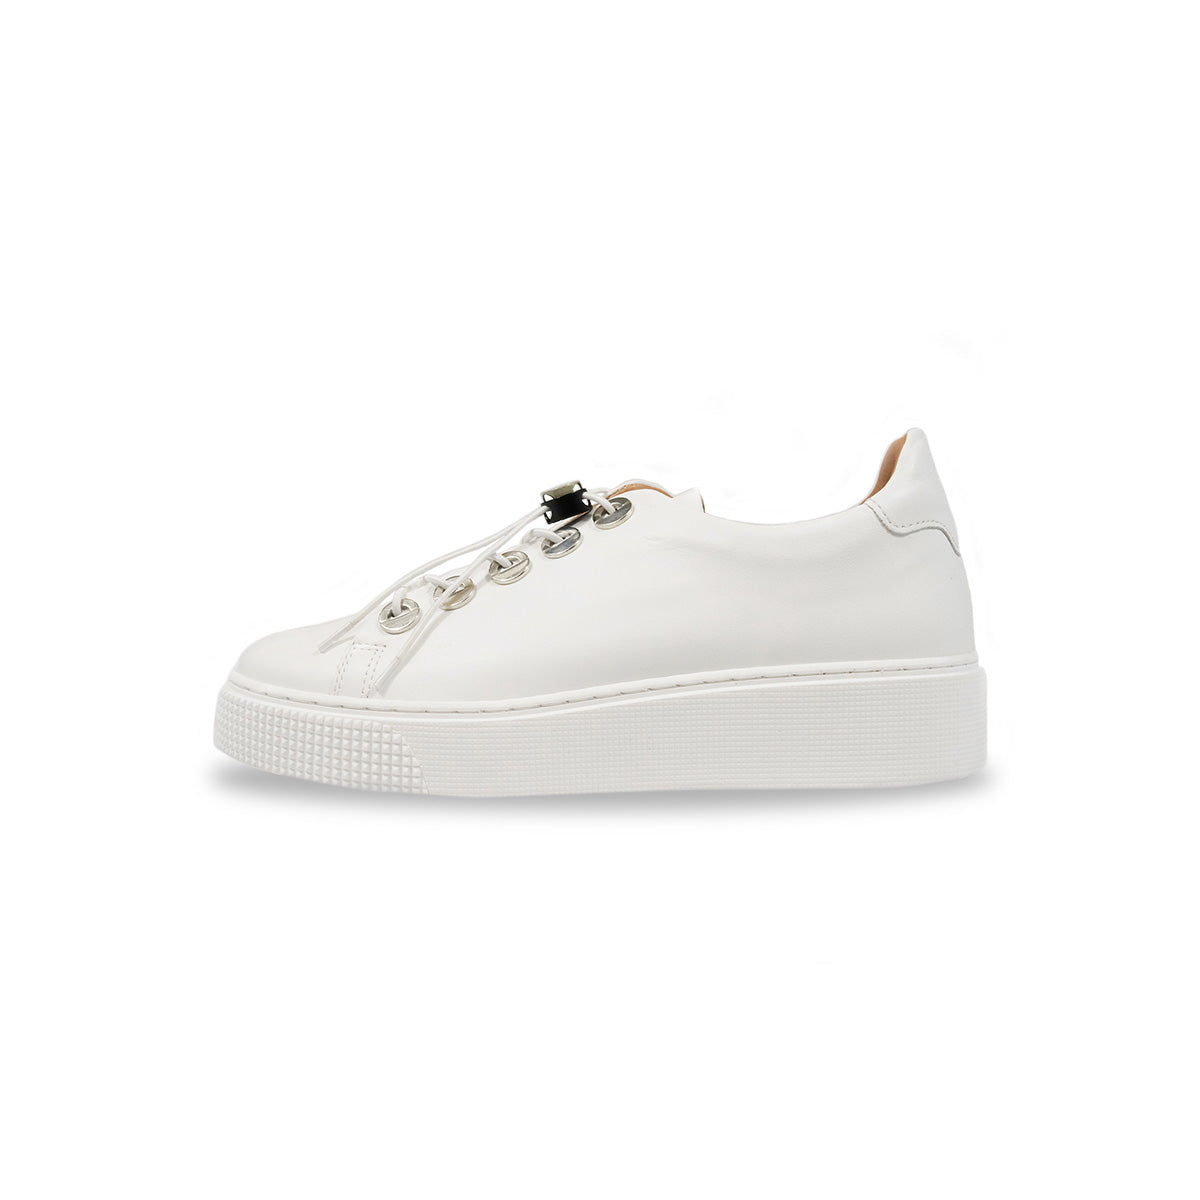 MJUS - Lace Up Sneaker in Bianco